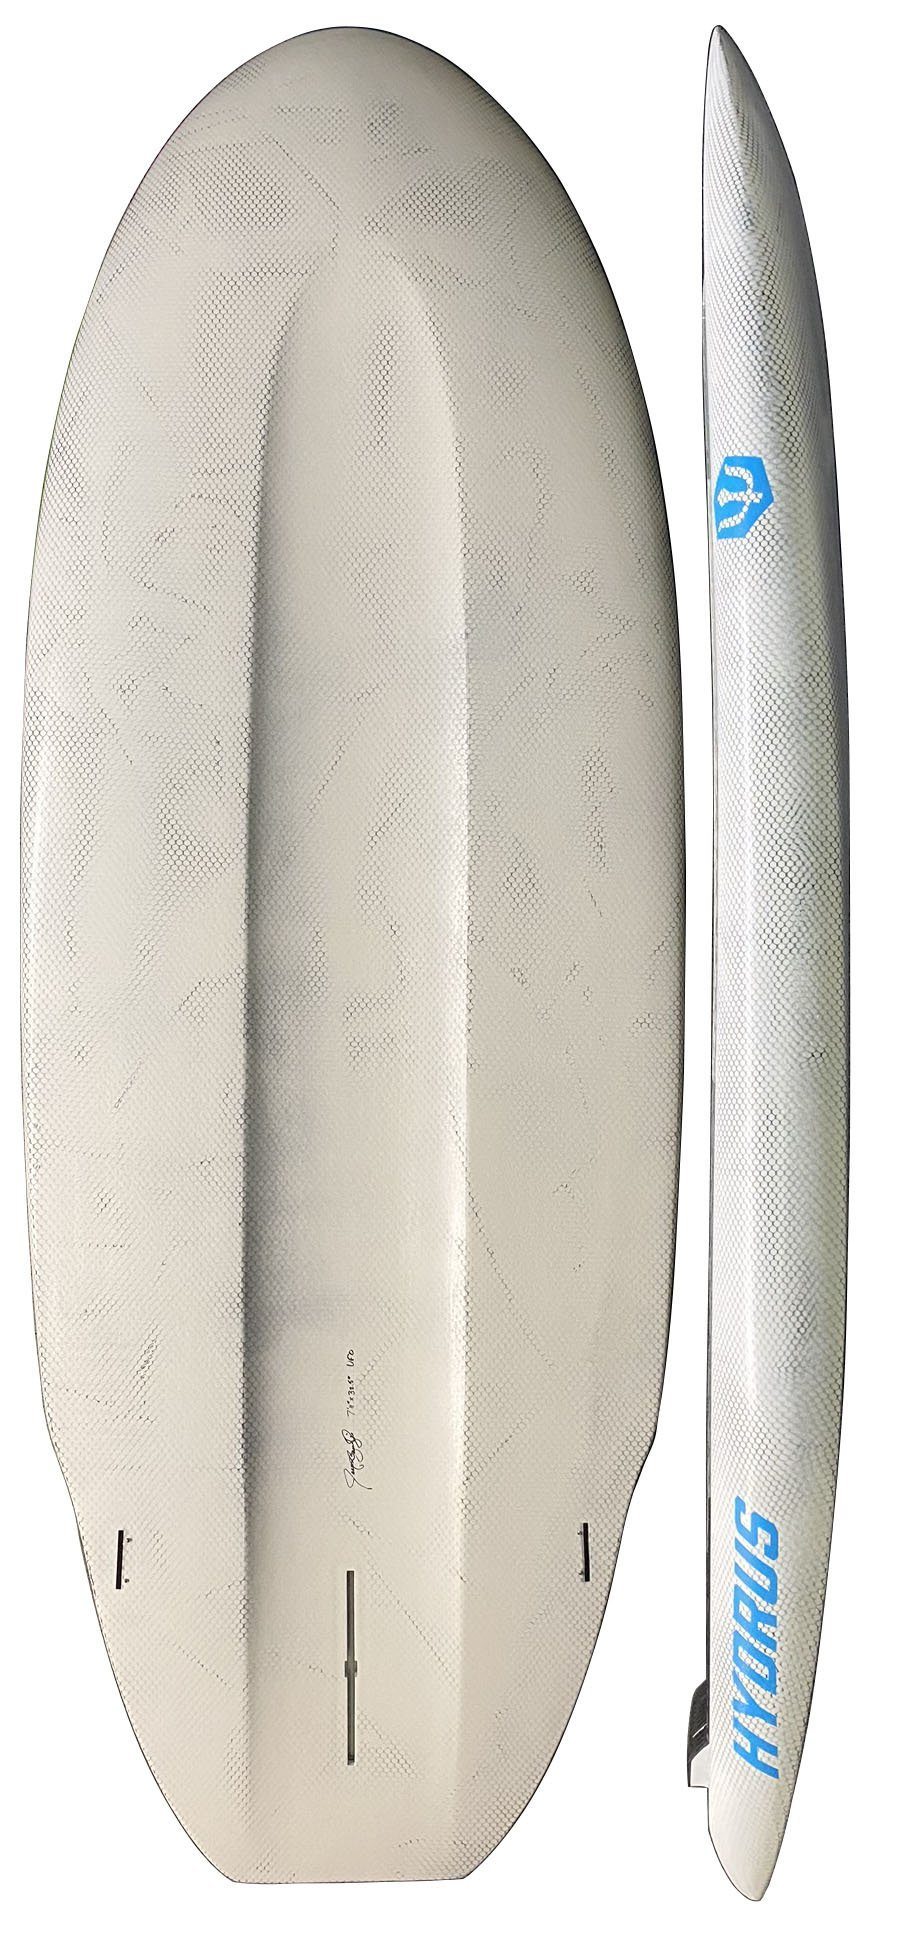 ufo-711-high-performance-river-play-surf-sup-sup-hydrus-board-tech-547452